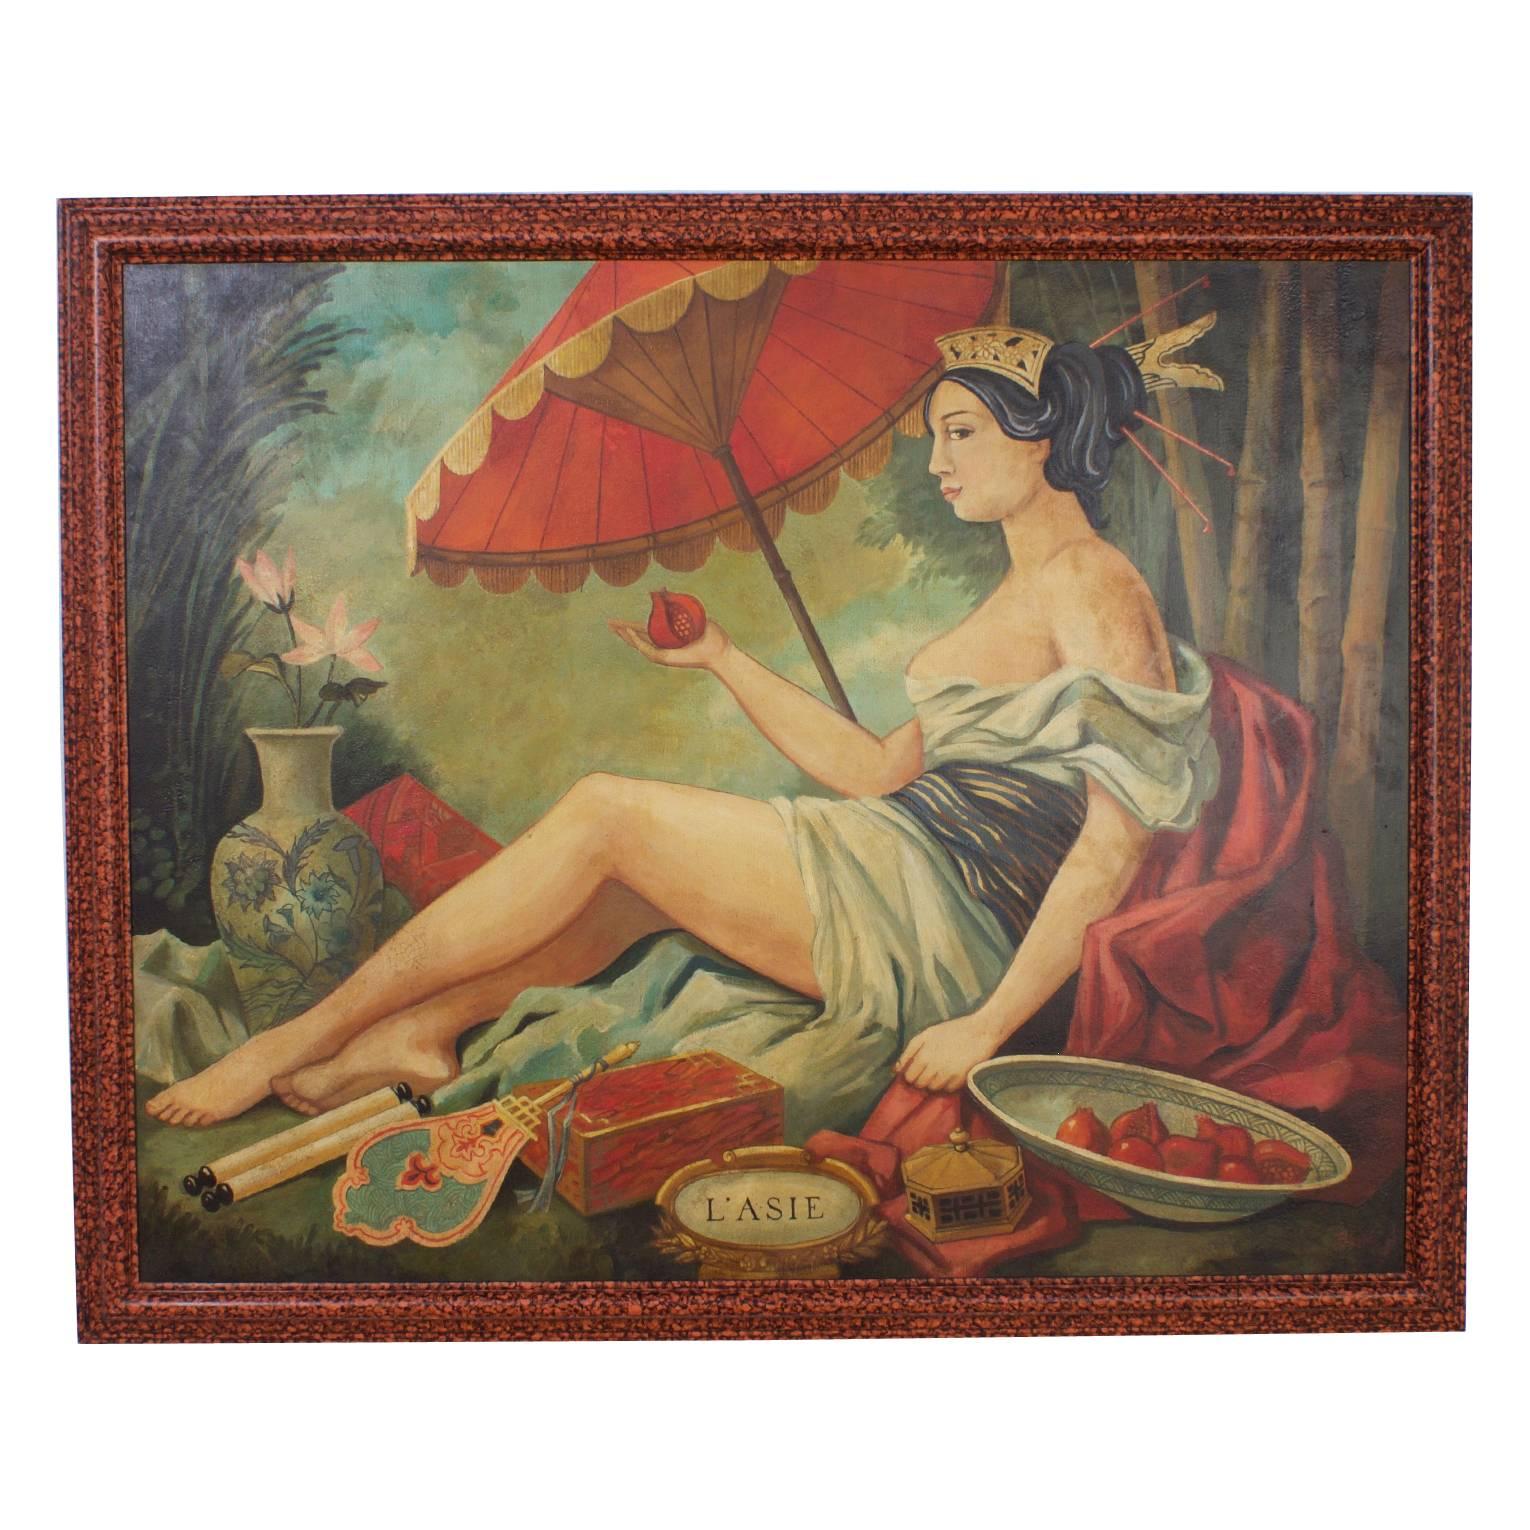 Large Oil on Canvas Painting Titled L'asie by William Skilling